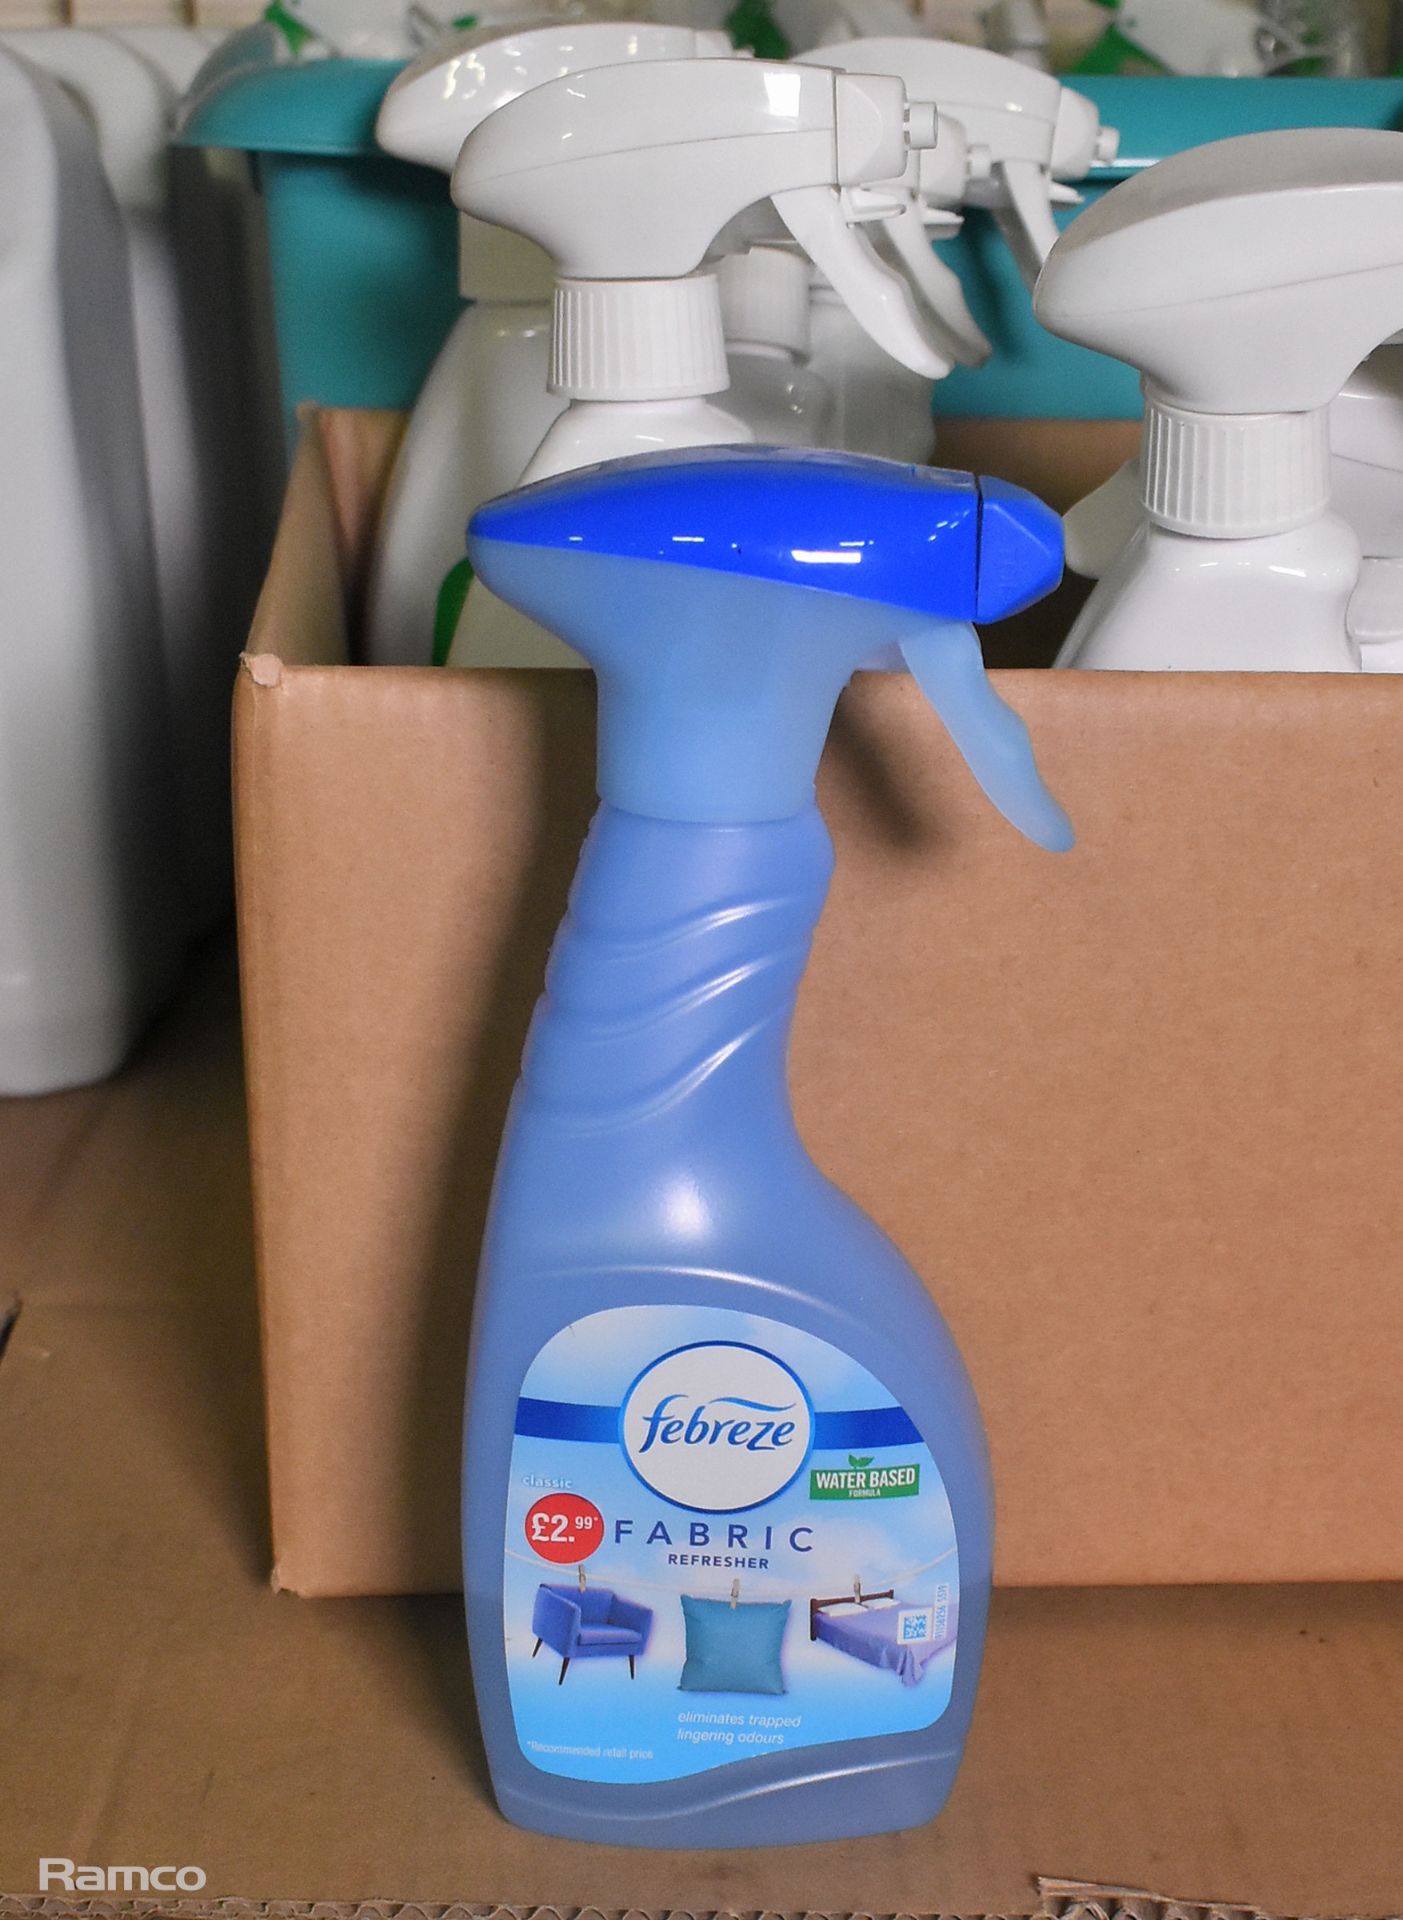 Multi-purpose cleaner disinfectant 5ltr and hand sprays, fabric refresher spray, empty hand sprayer - Image 9 of 11